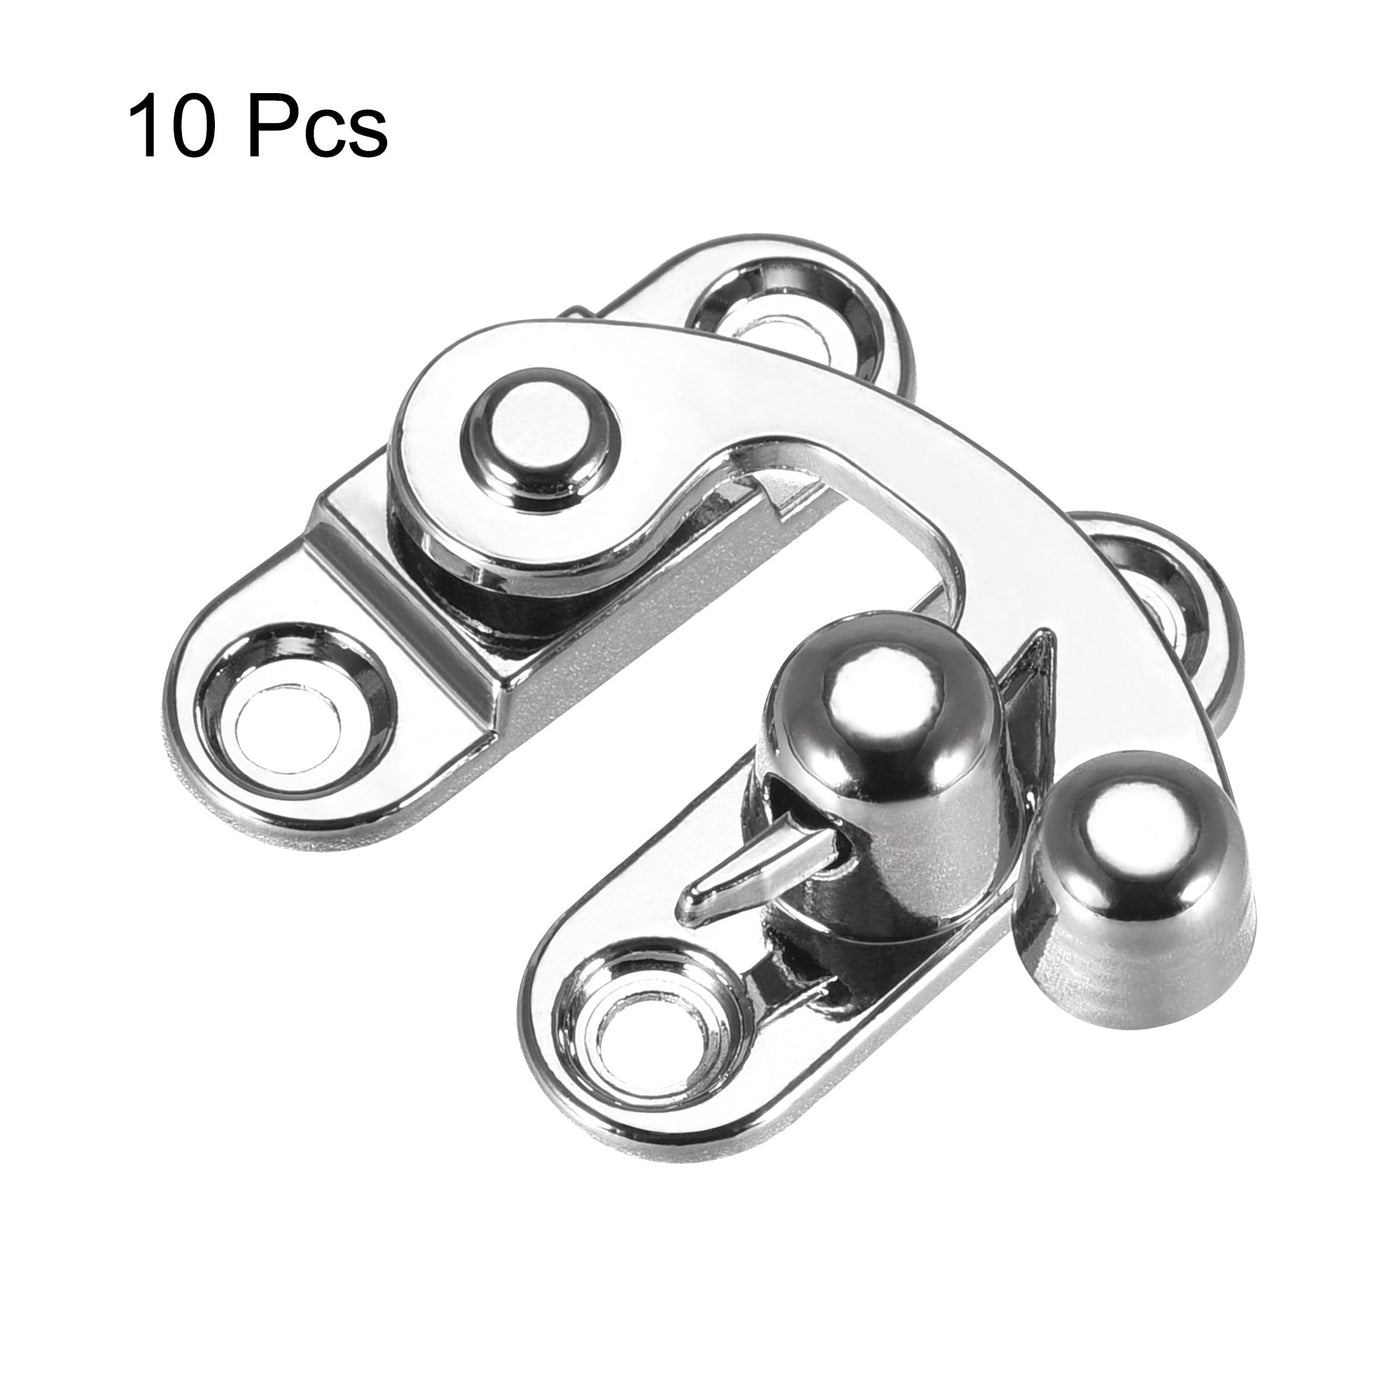 uxcell Uxcell Antique Vintage Lock Clasp Right Latch Hook Hasp 32mmx28mm Swing Arm Latch Silver Tone 10 Pcs